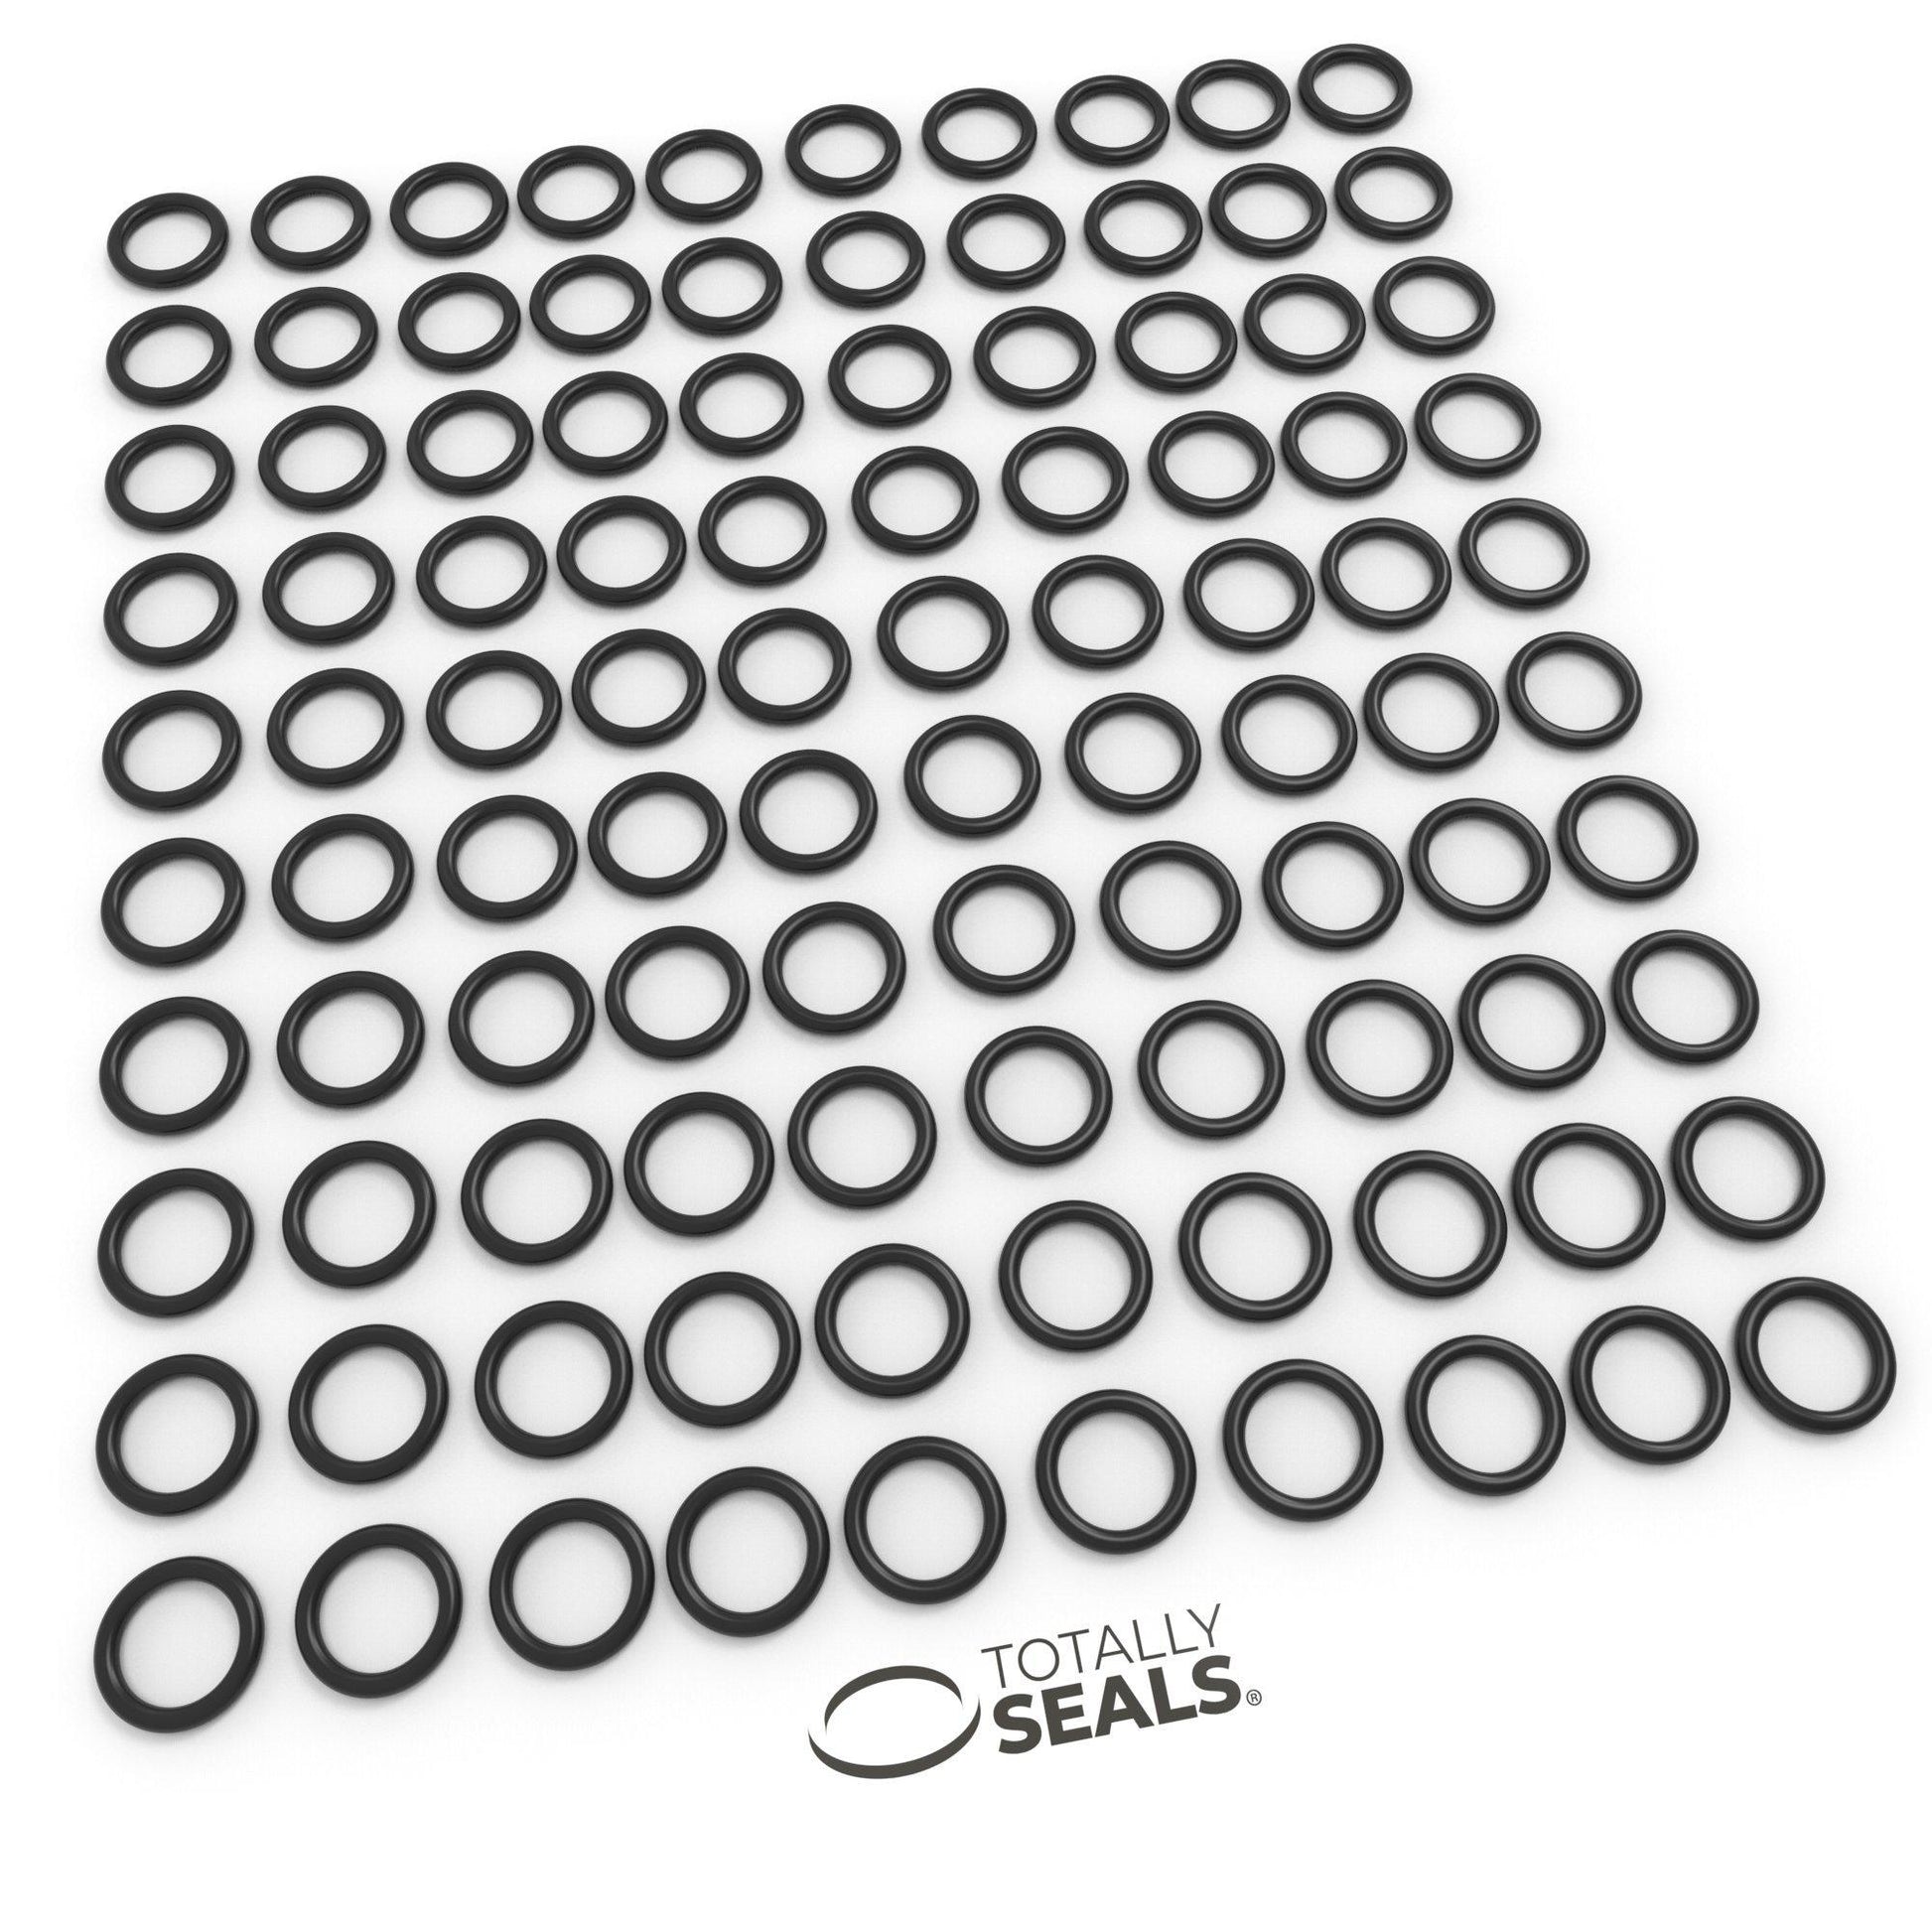 29mm x 1.5mm (32mm OD) Nitrile O-Rings - Totally Seals®